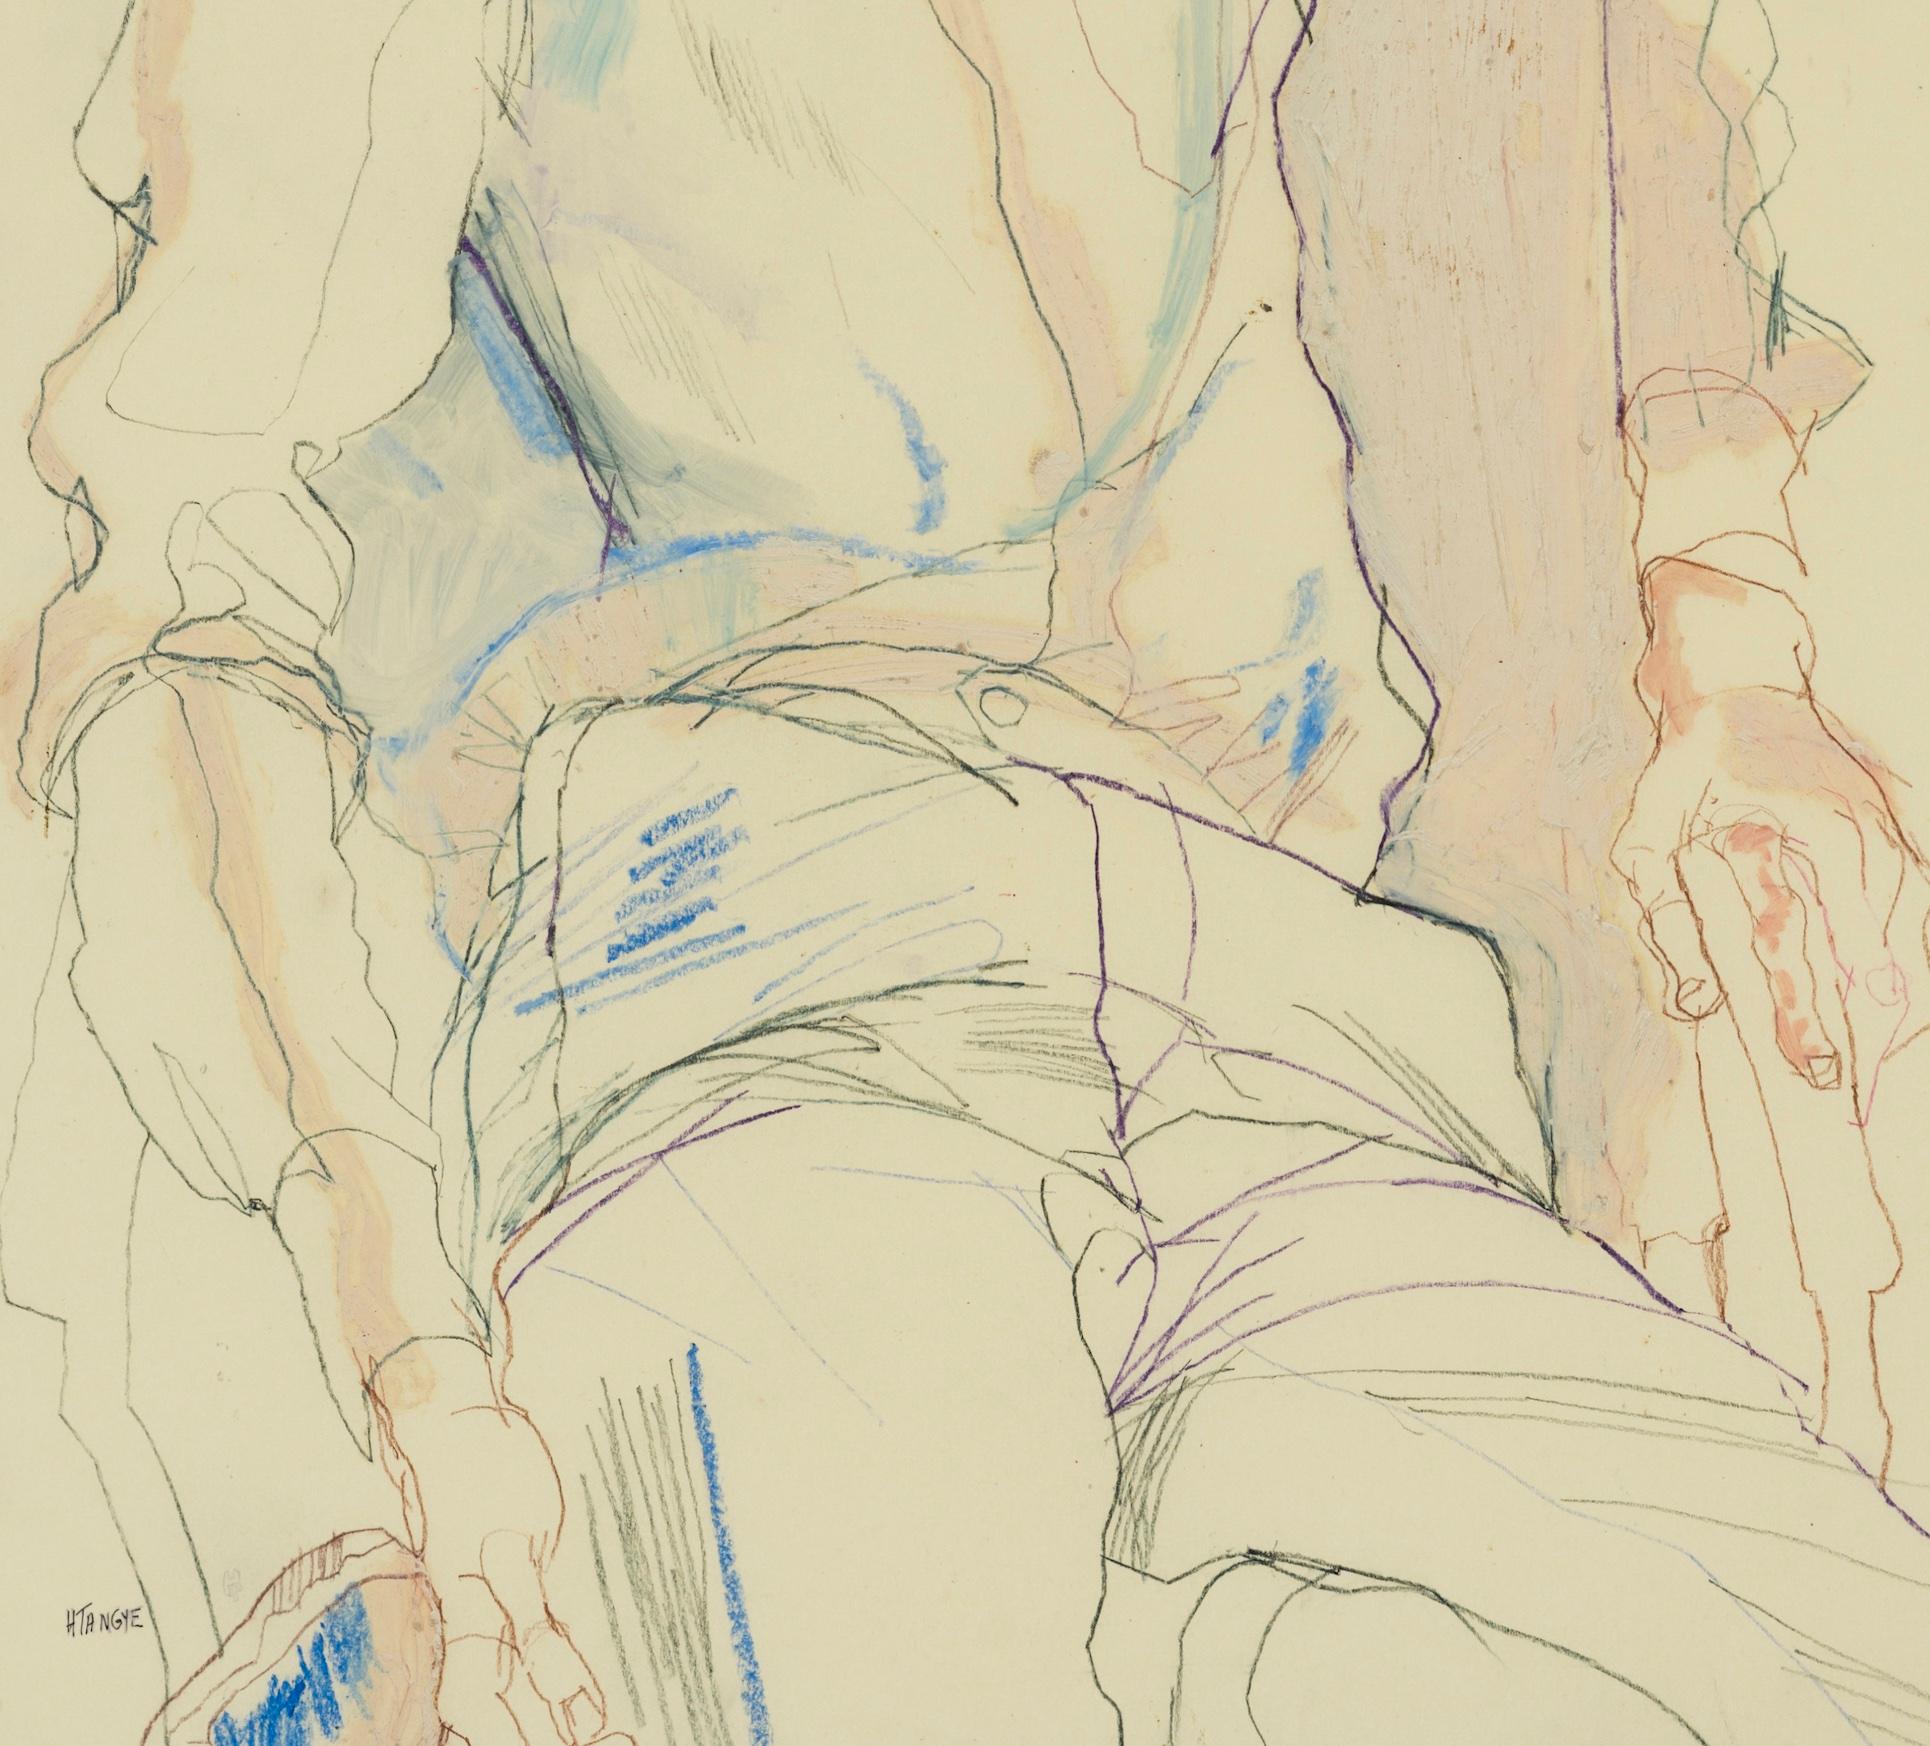 Stuart (Sitting, Arms Draped), Mixed media on Pergamenata parchment - Contemporary Painting by Howard Tangye